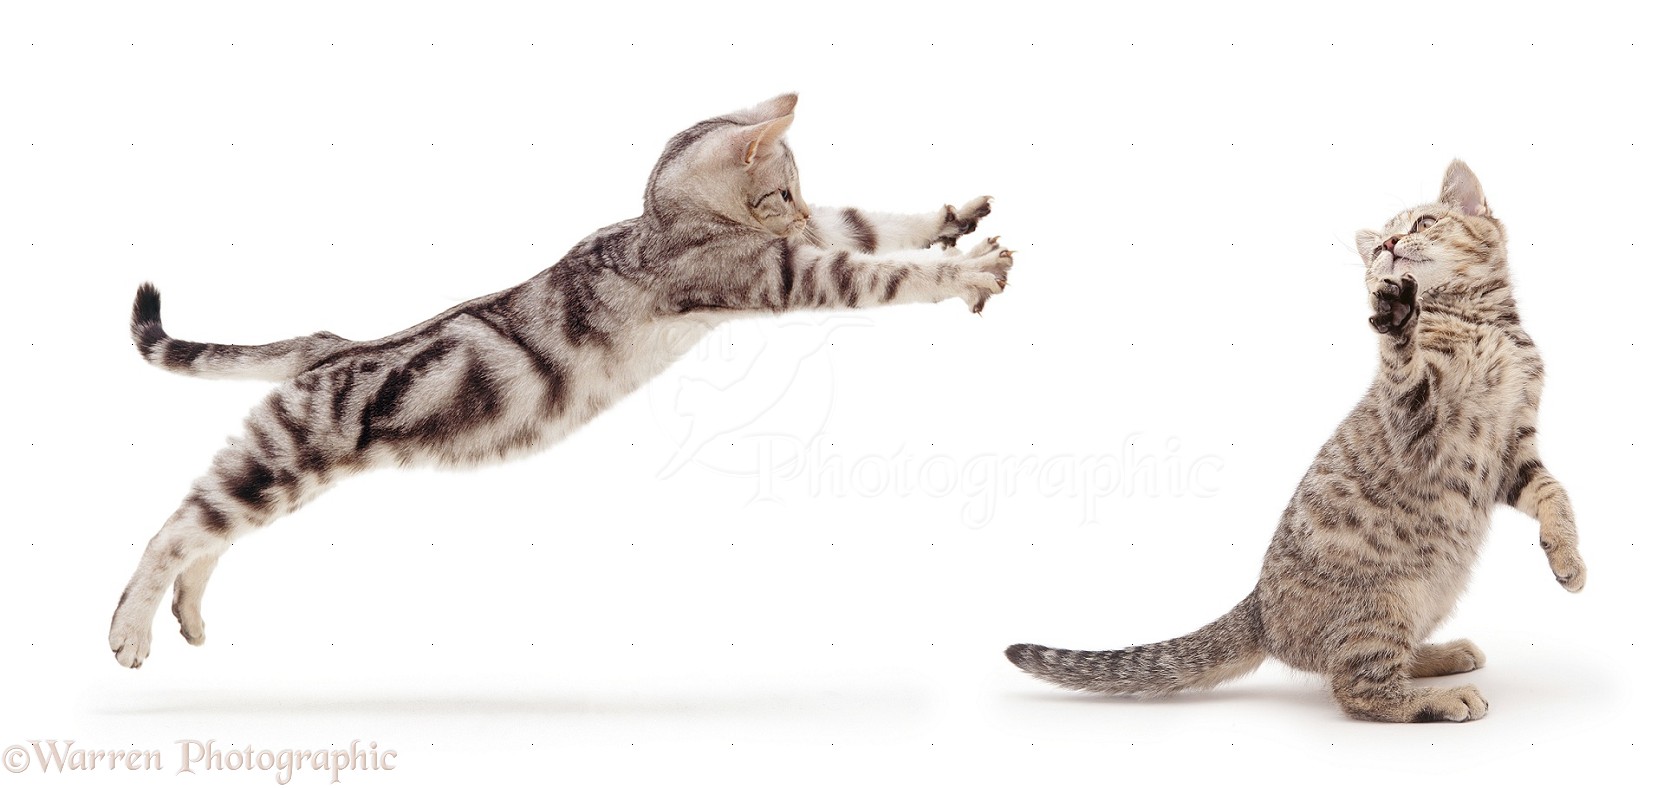 Silver tabby cats play fighting photo WP23191